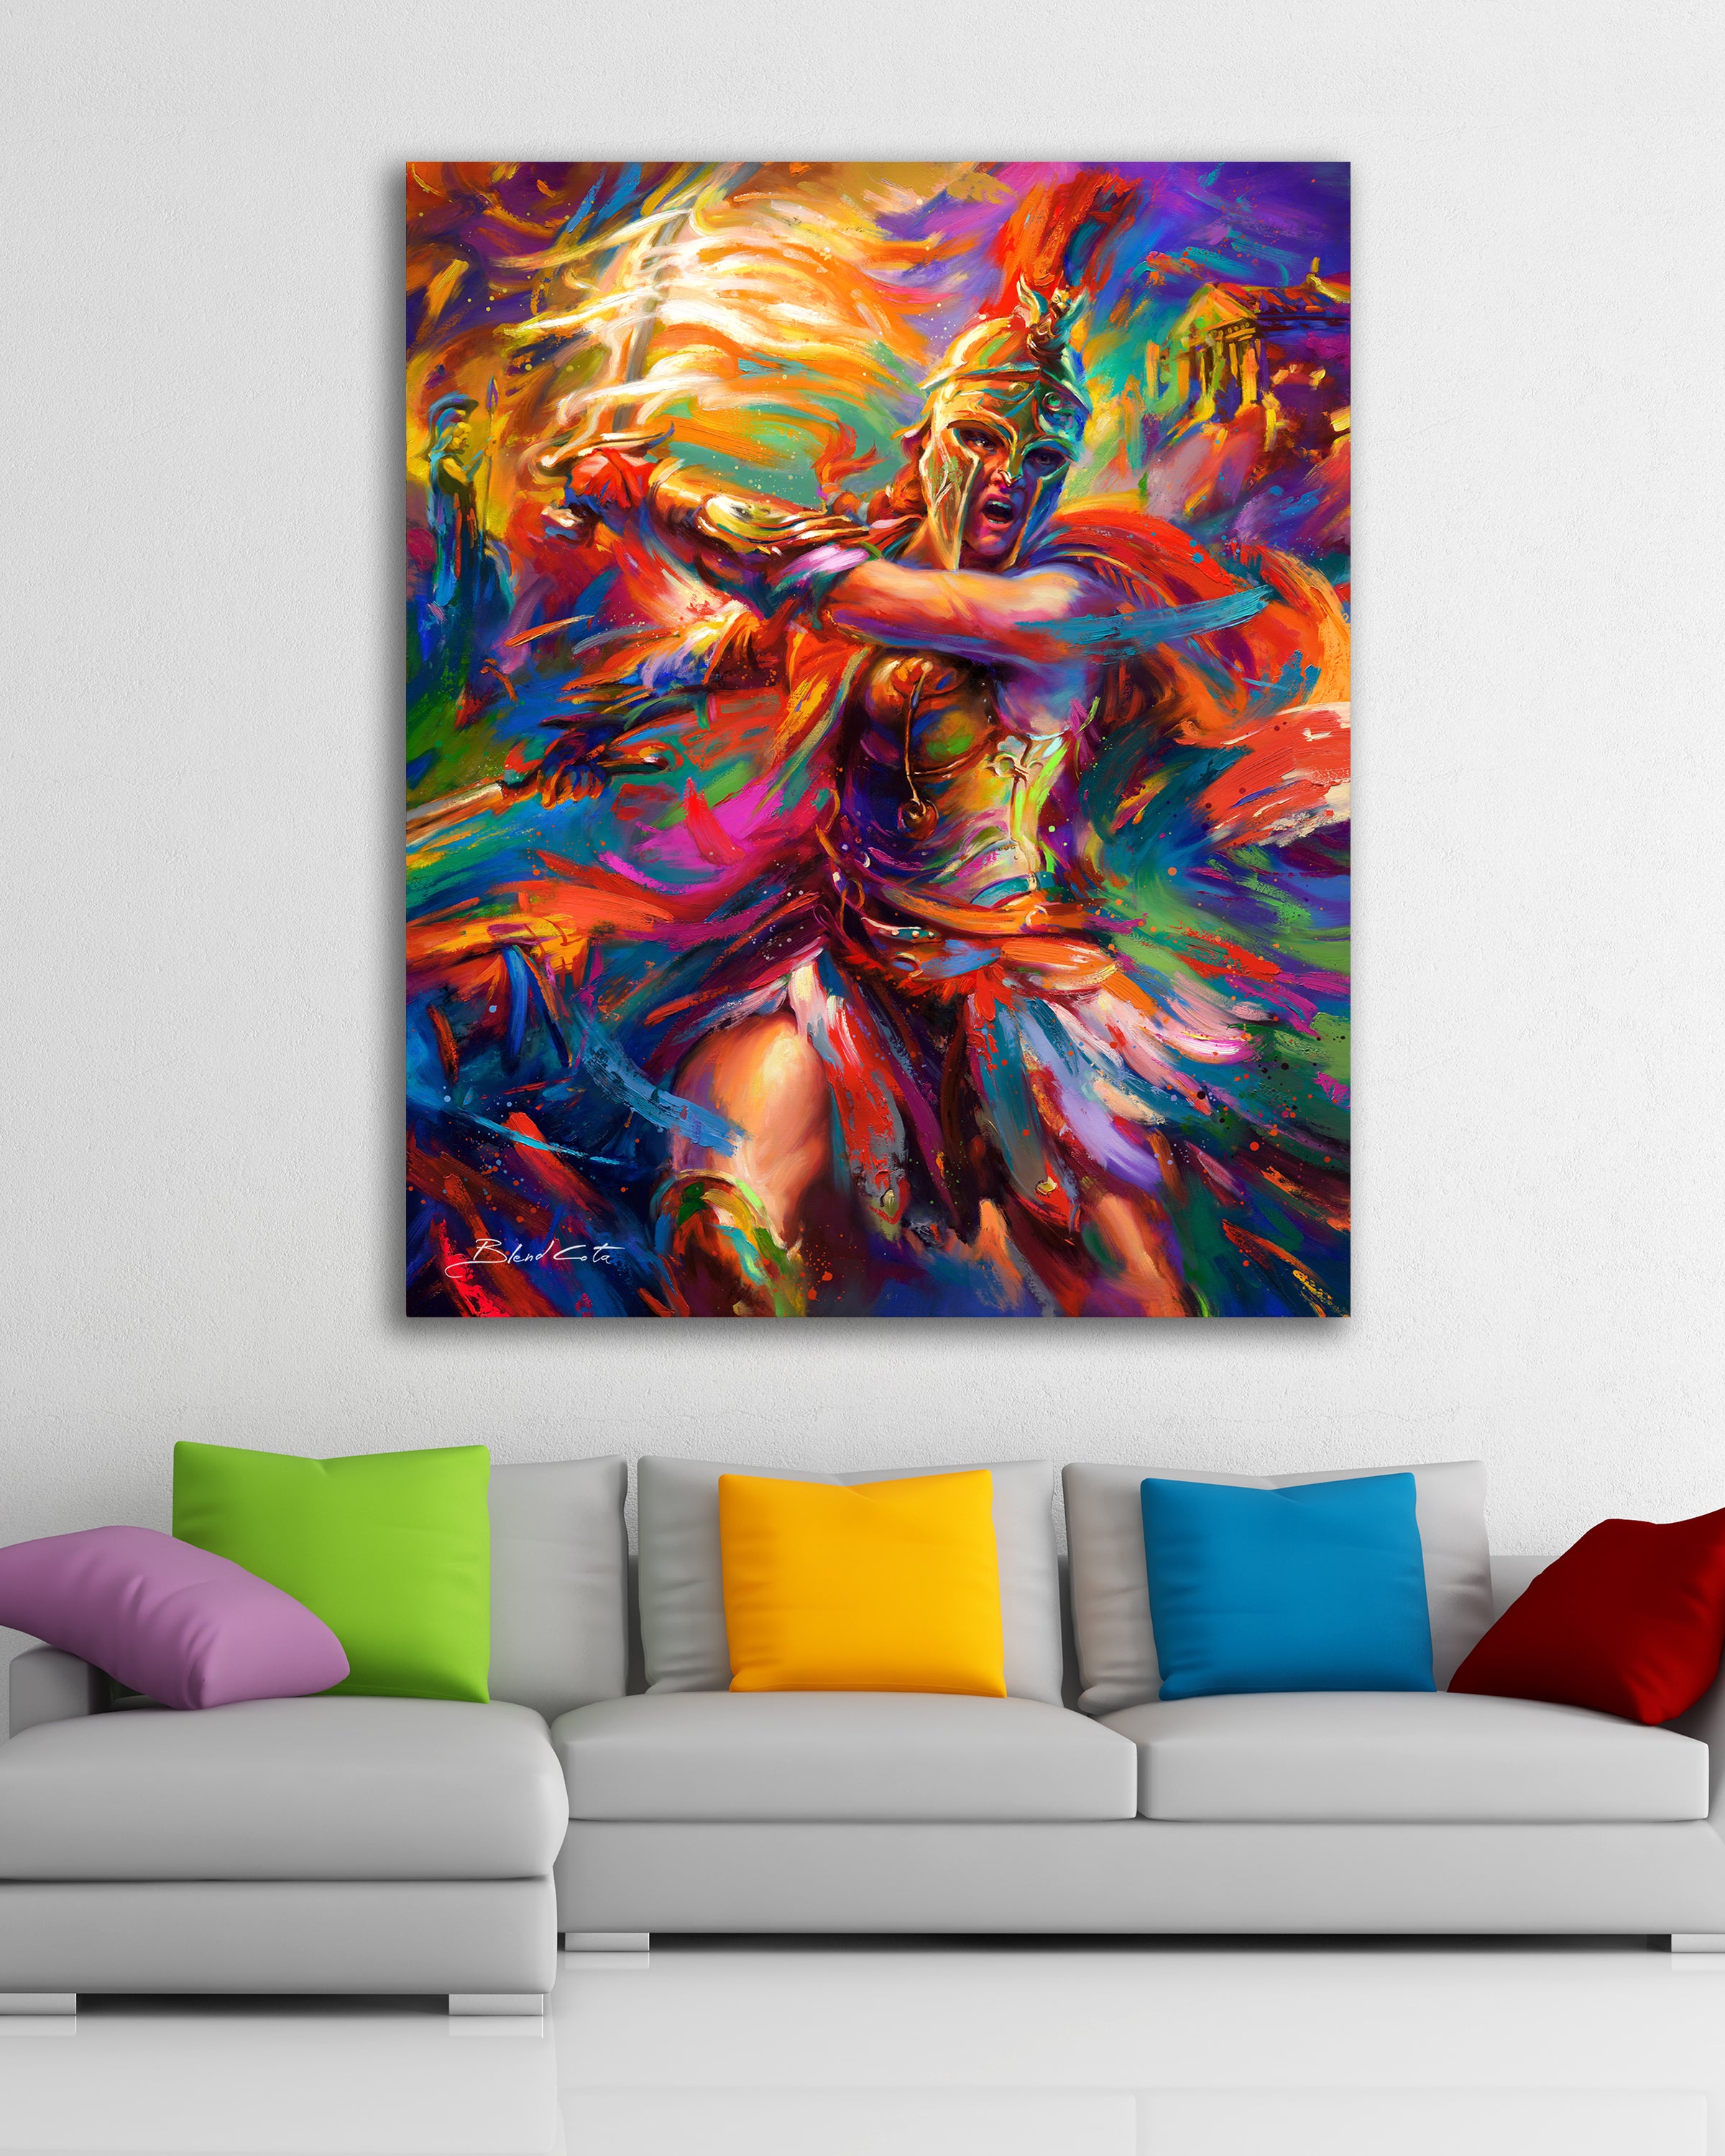 Oil on canvas original painting of Assassin's Creed Kassandra of Odyssey bursting forth with energy and painted with colorful brushstrokes in an expressionistic style in a room with couch and pillows.